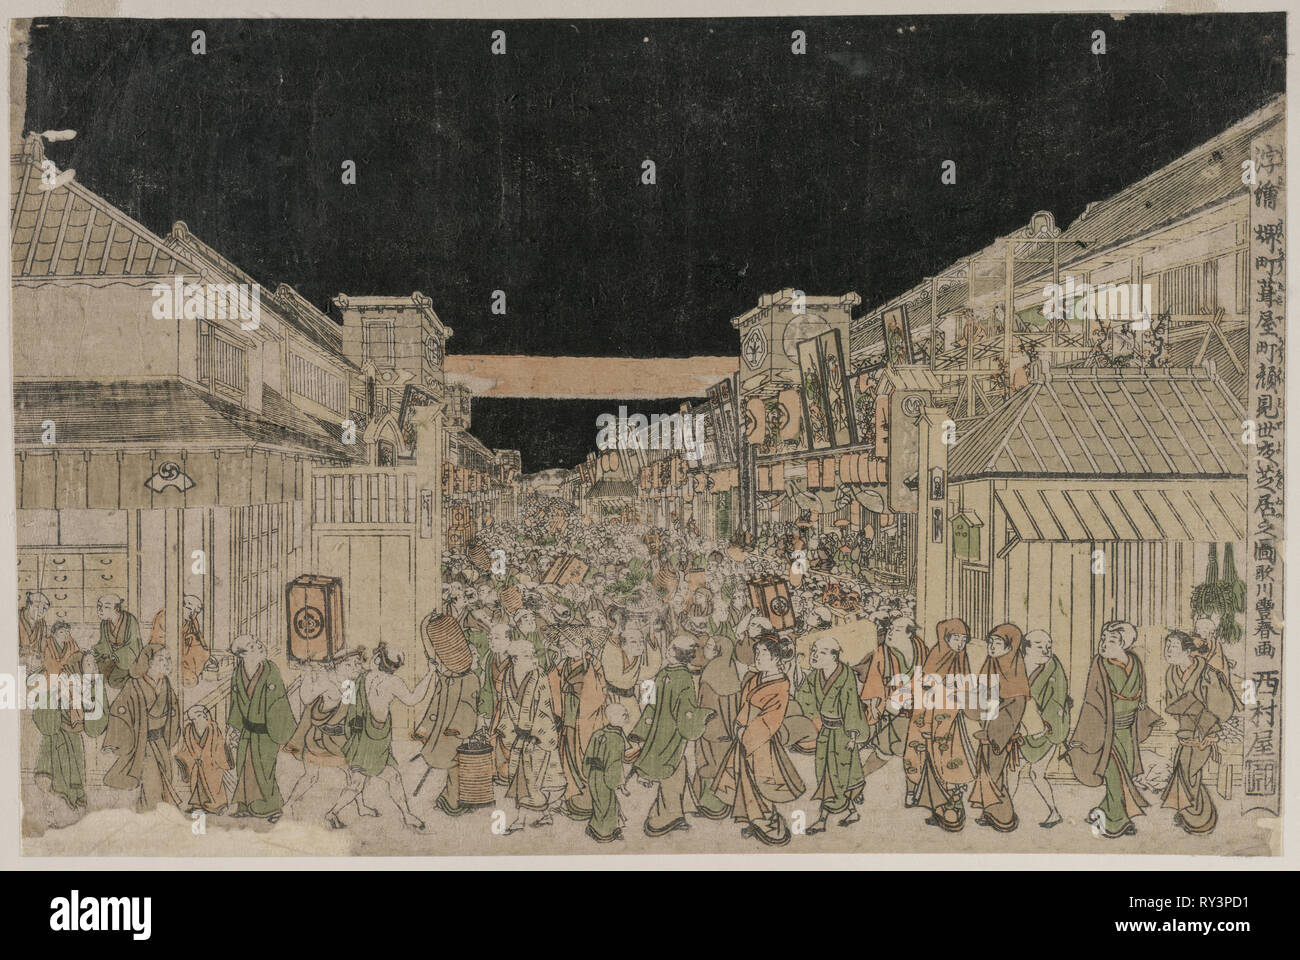 Night Scene, Street of Theatres, late 1700s-early 18002. Japan, Edo Period (1615-1868). Color woodblock print; sheet: 24.8 x 37.2 cm (9 3/4 x 14 5/8 in Stock Photo